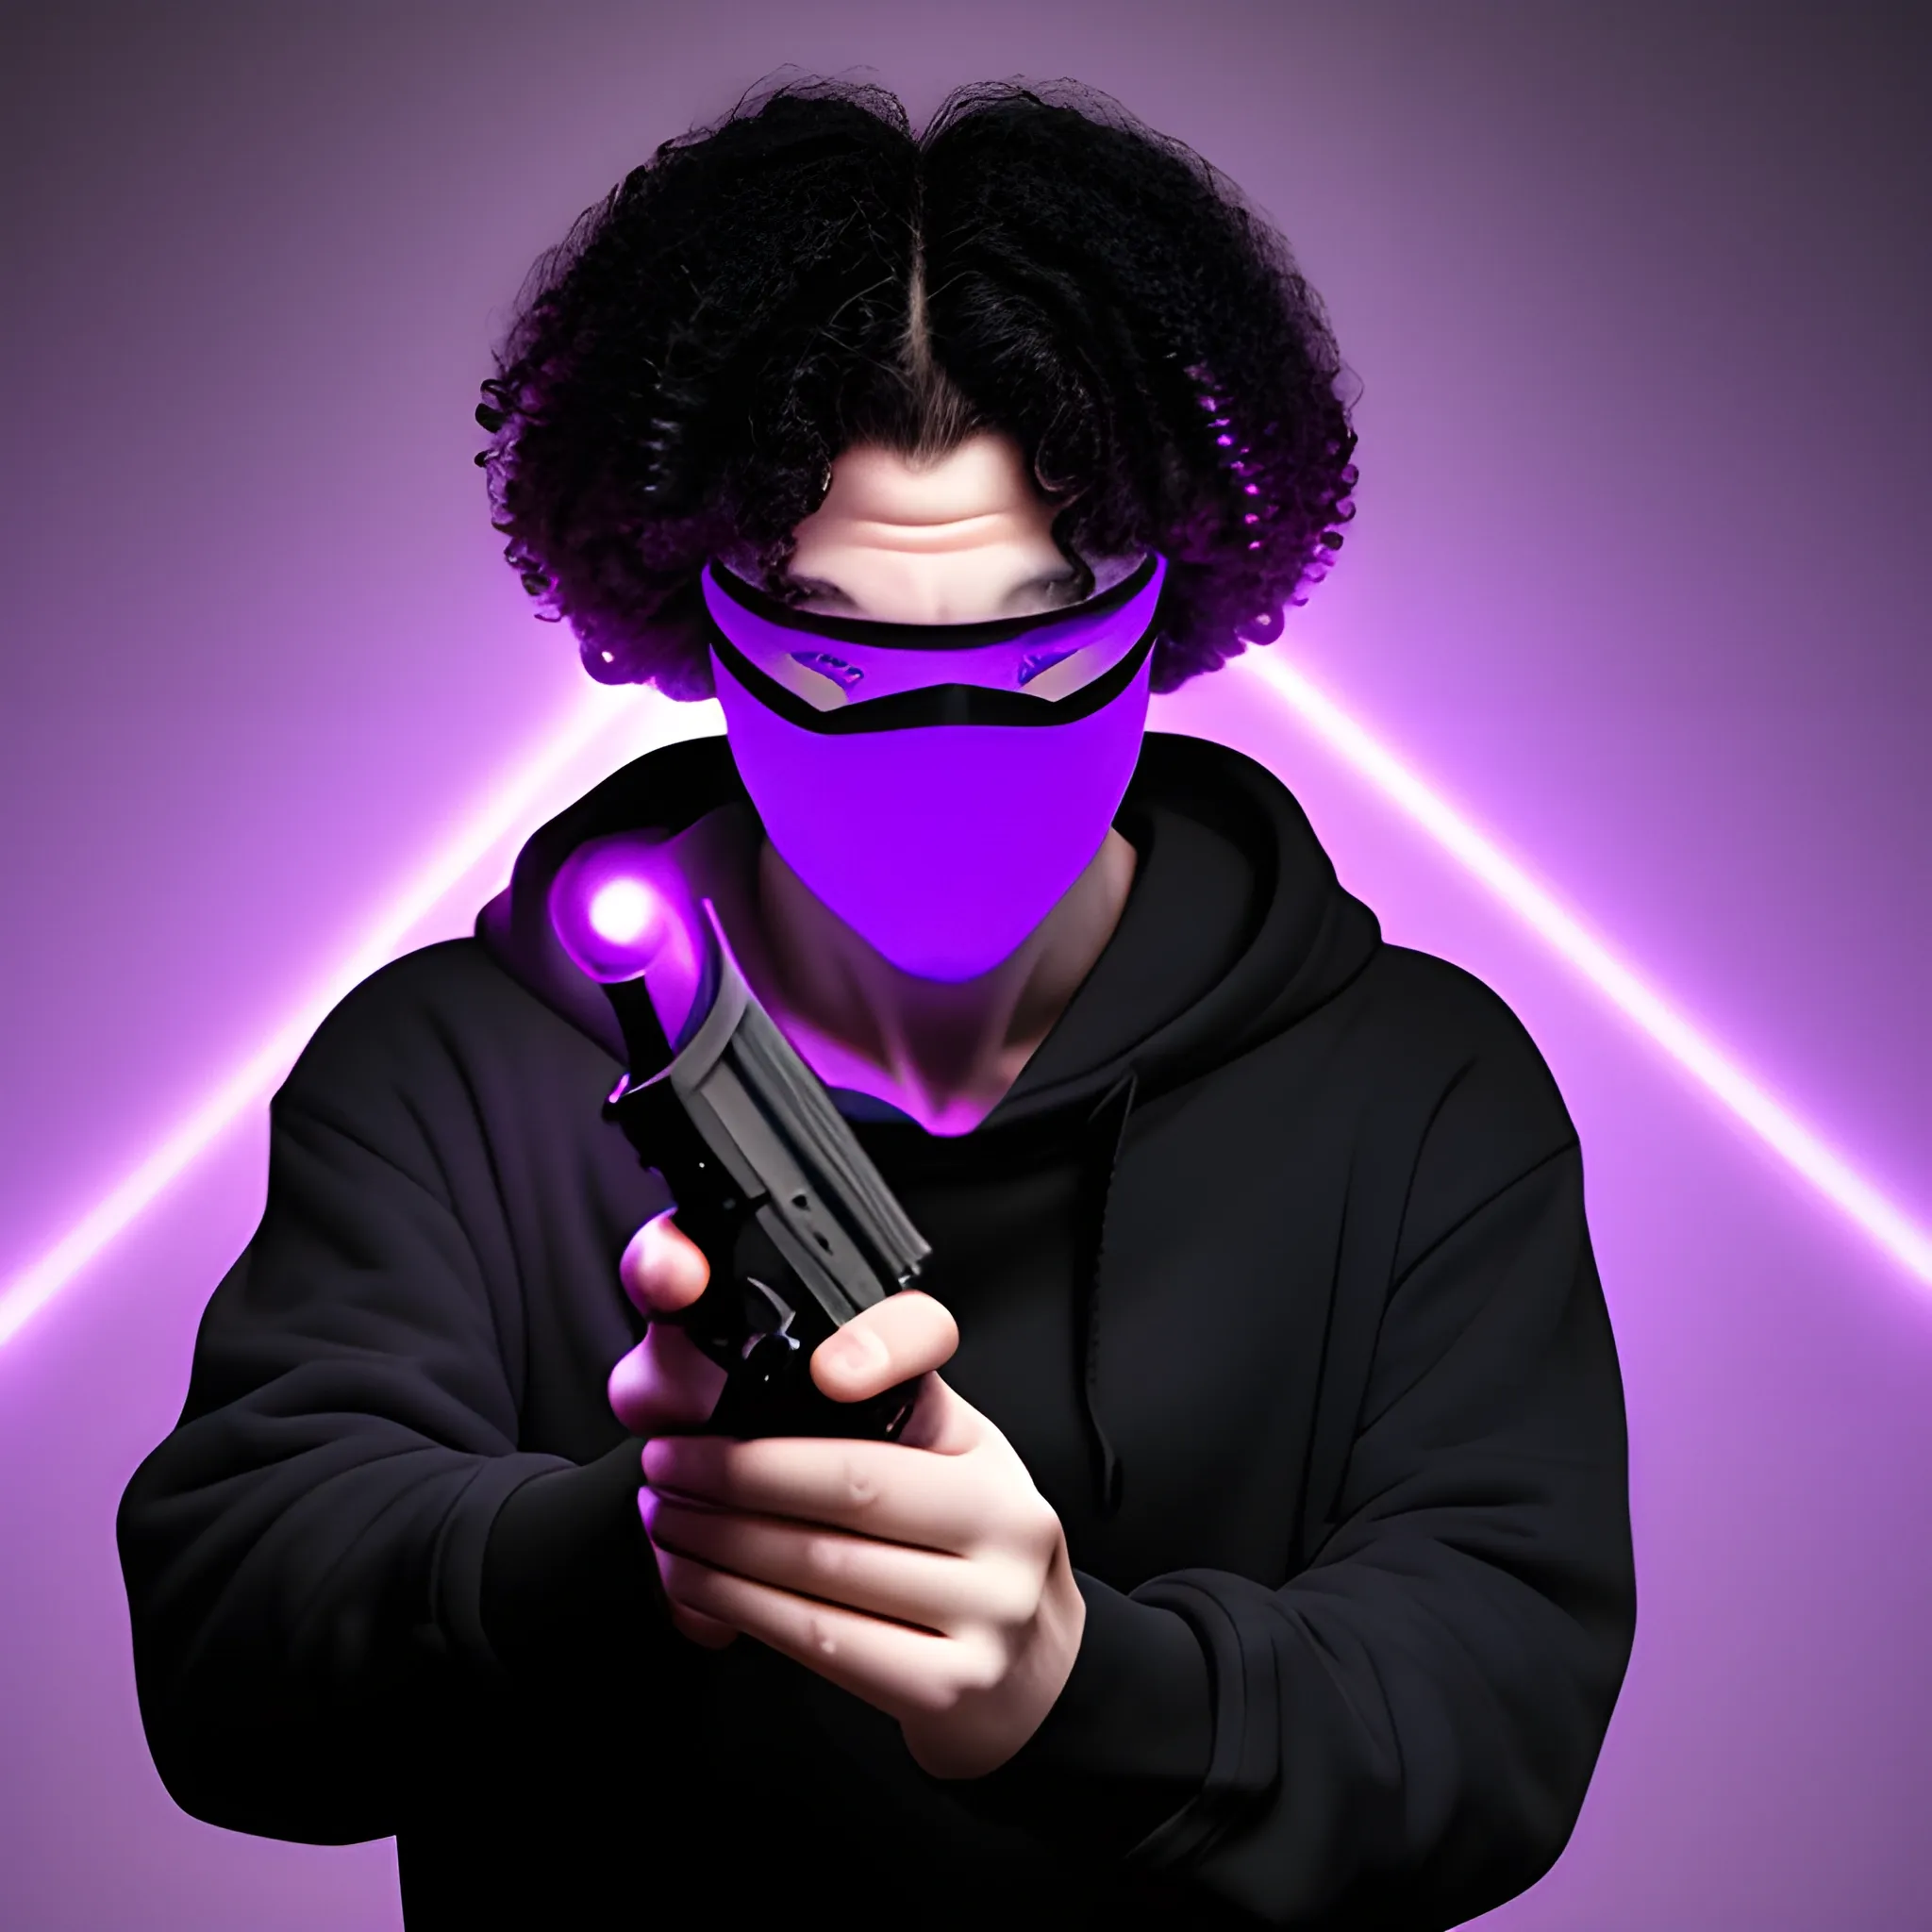 A white man with black curly hair, with a blindfold on, a white hoodie and a look of fear and betrayal on his face, holding a gun. And a purple light from behind him